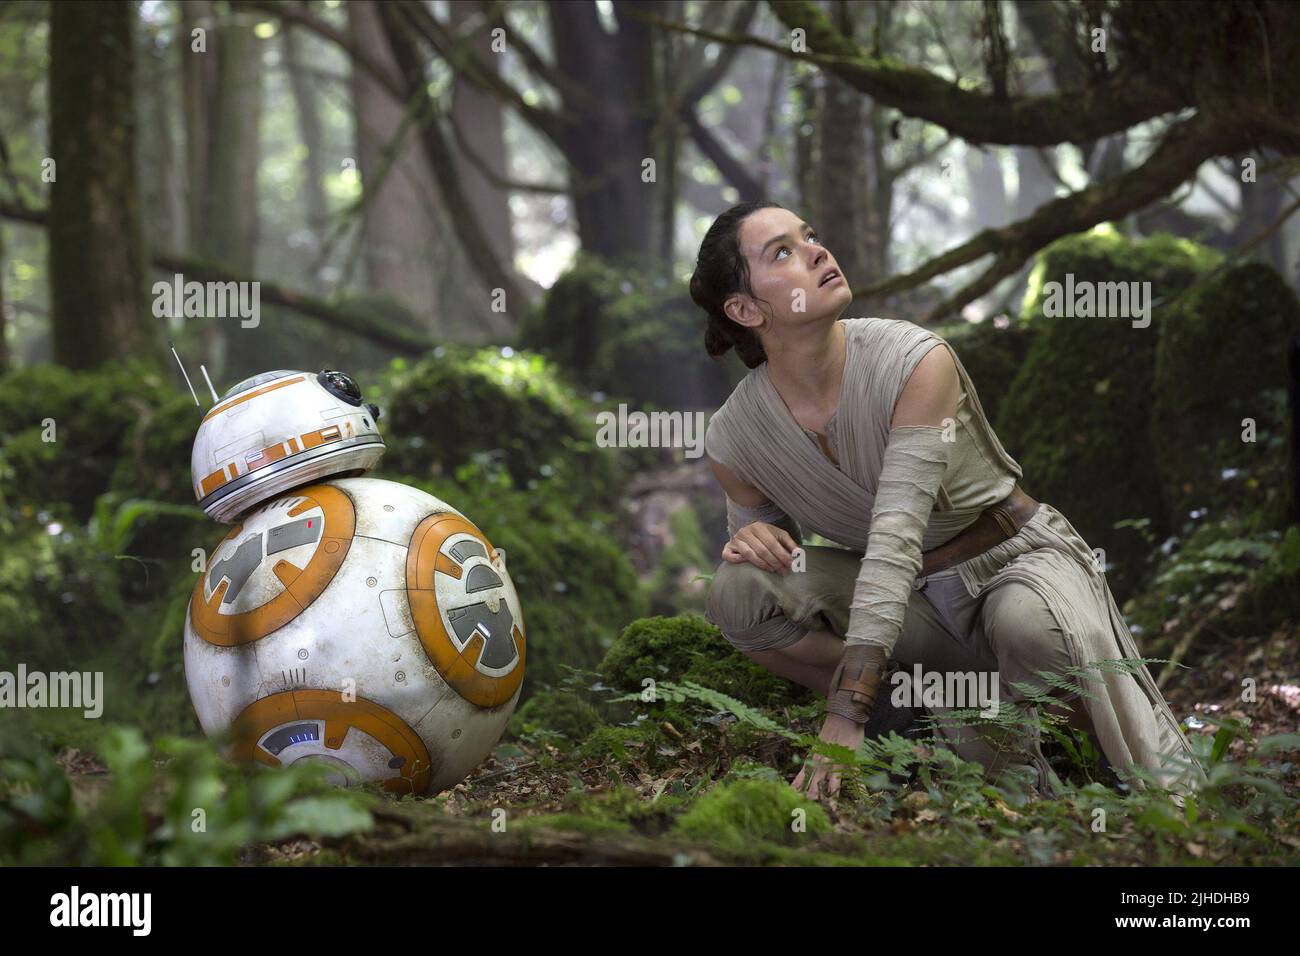 BB-8 DROID, DAISY RIDLEY, STAR WARS: EPISODE VII - THE FORCE AWAKENS, 2015 Stock Photo